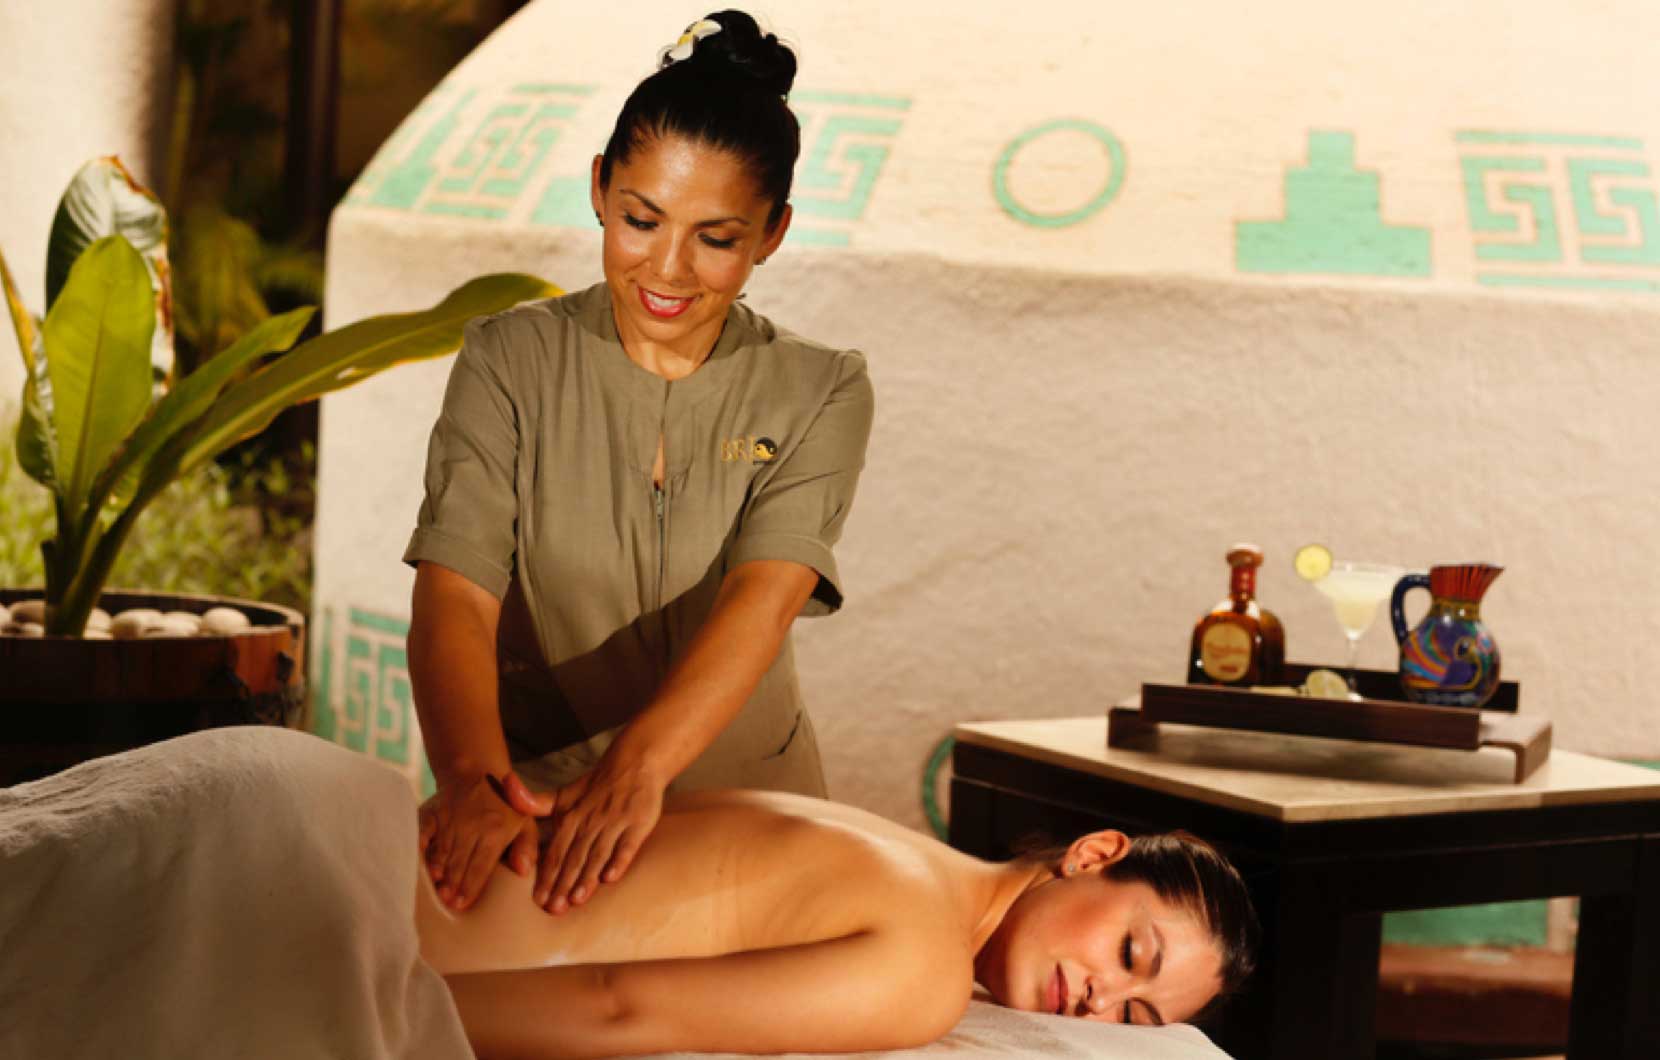 Our expert massage therapists will ensure your complete relaxation.